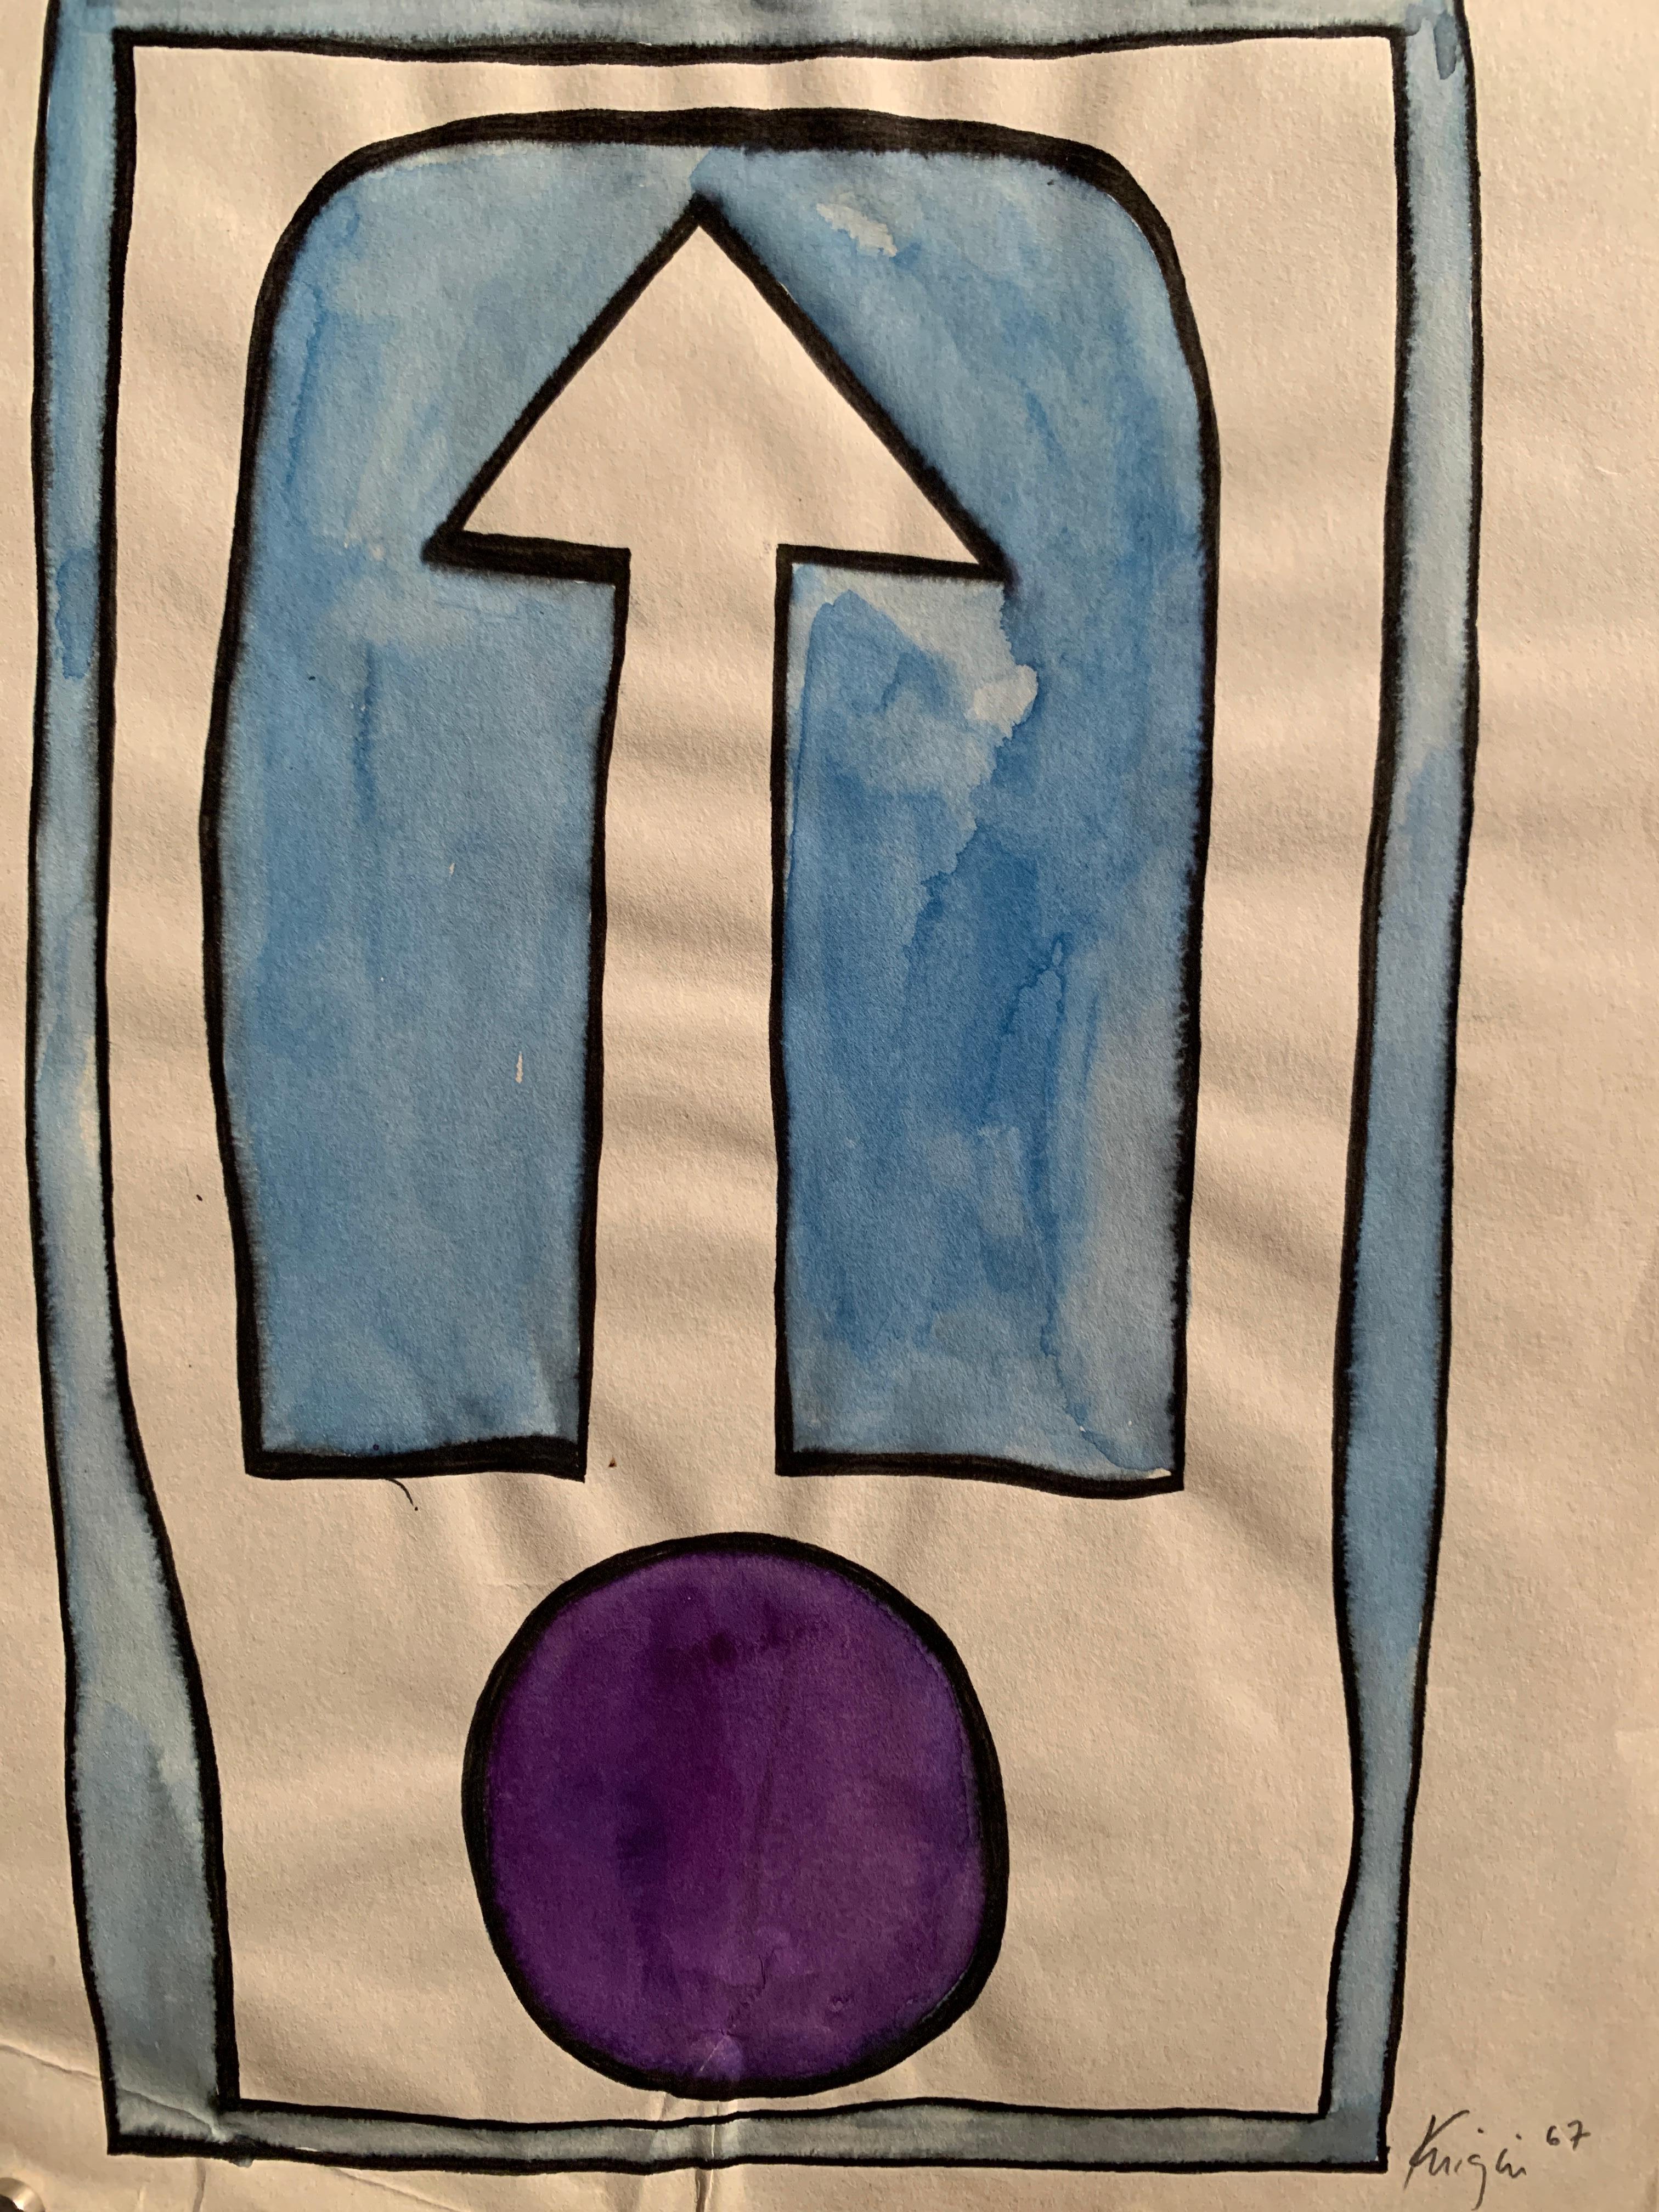 Michael Knigin
Abstract 3 Blue and Purple
1967
Ink brush and watercolor on paper
8.25